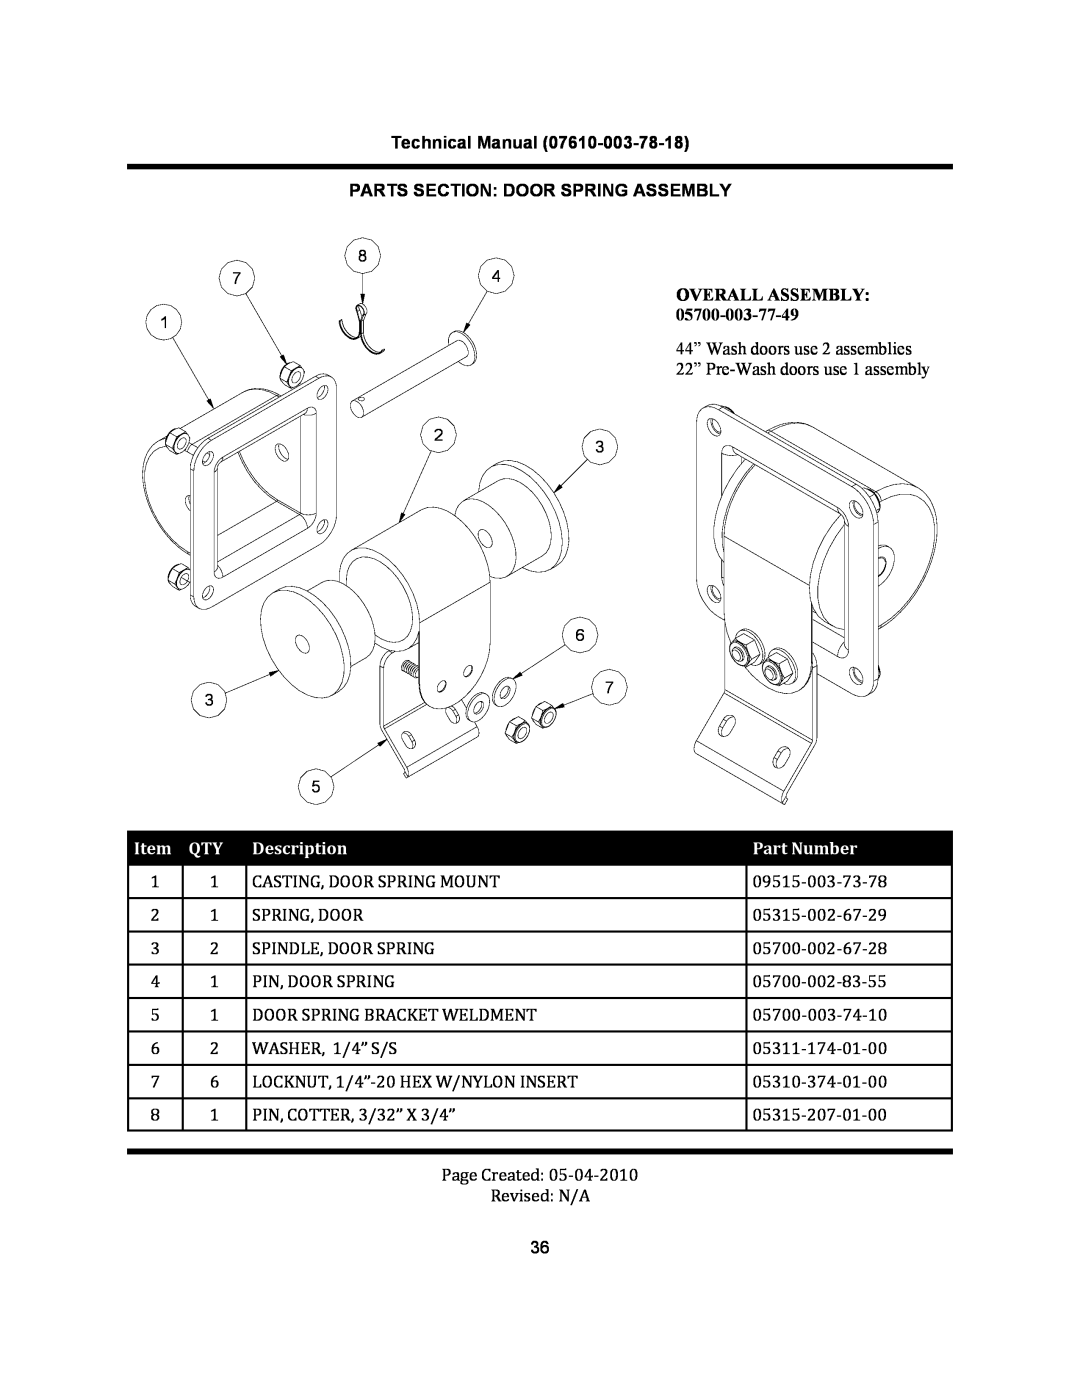 Jackson CREW 44S manual Technical Manual PARTS SECTION DOOR SPRING ASSEMBLY, Overall Assembly, 05700-003-77-49, Description 